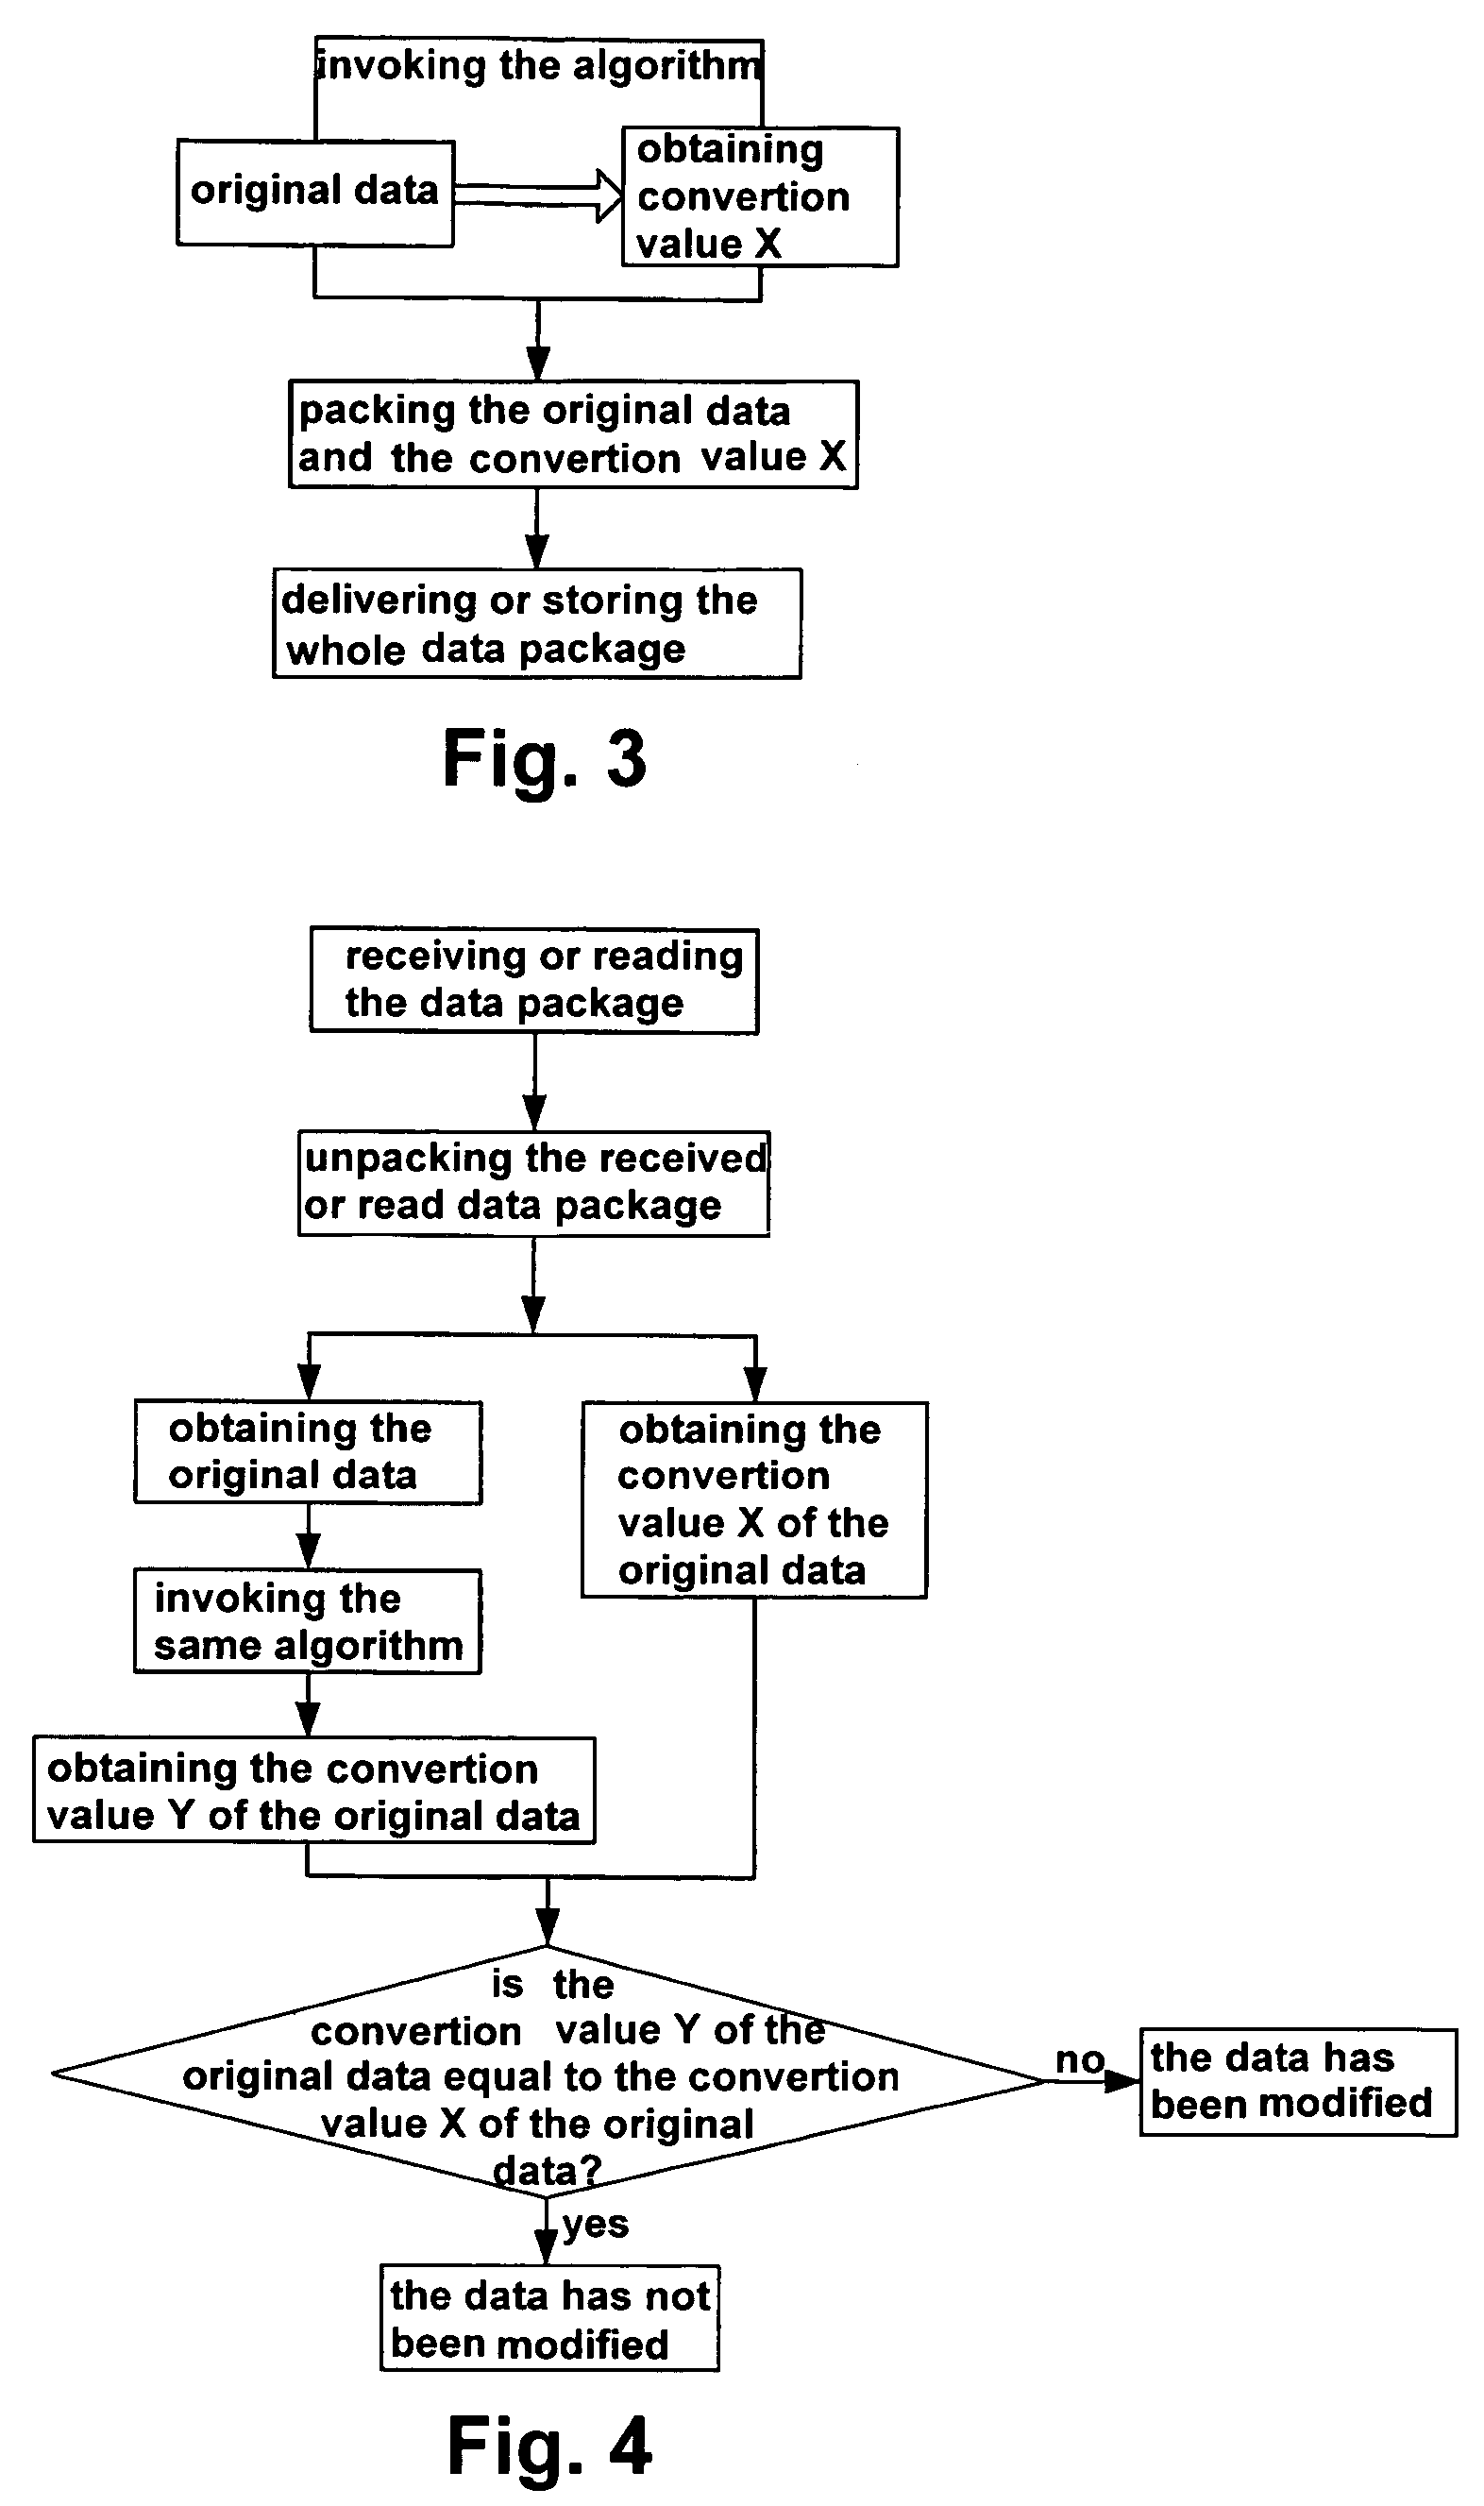 Method for realizing security storage and algorithm storage by means of semiconductor memory device